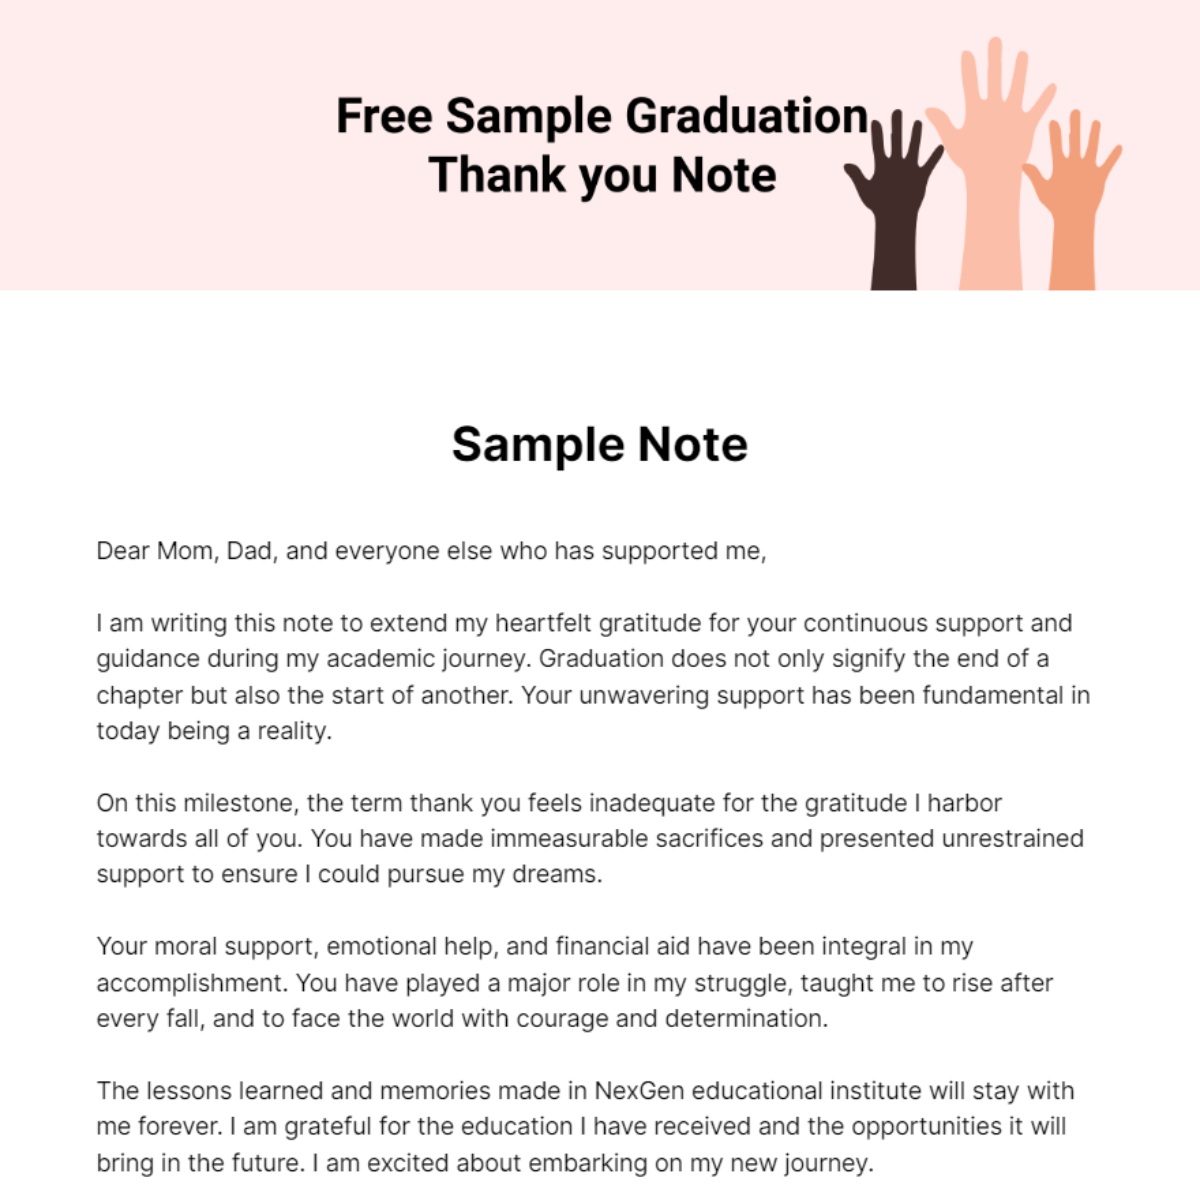 Sample Graduation Thank you Note Template